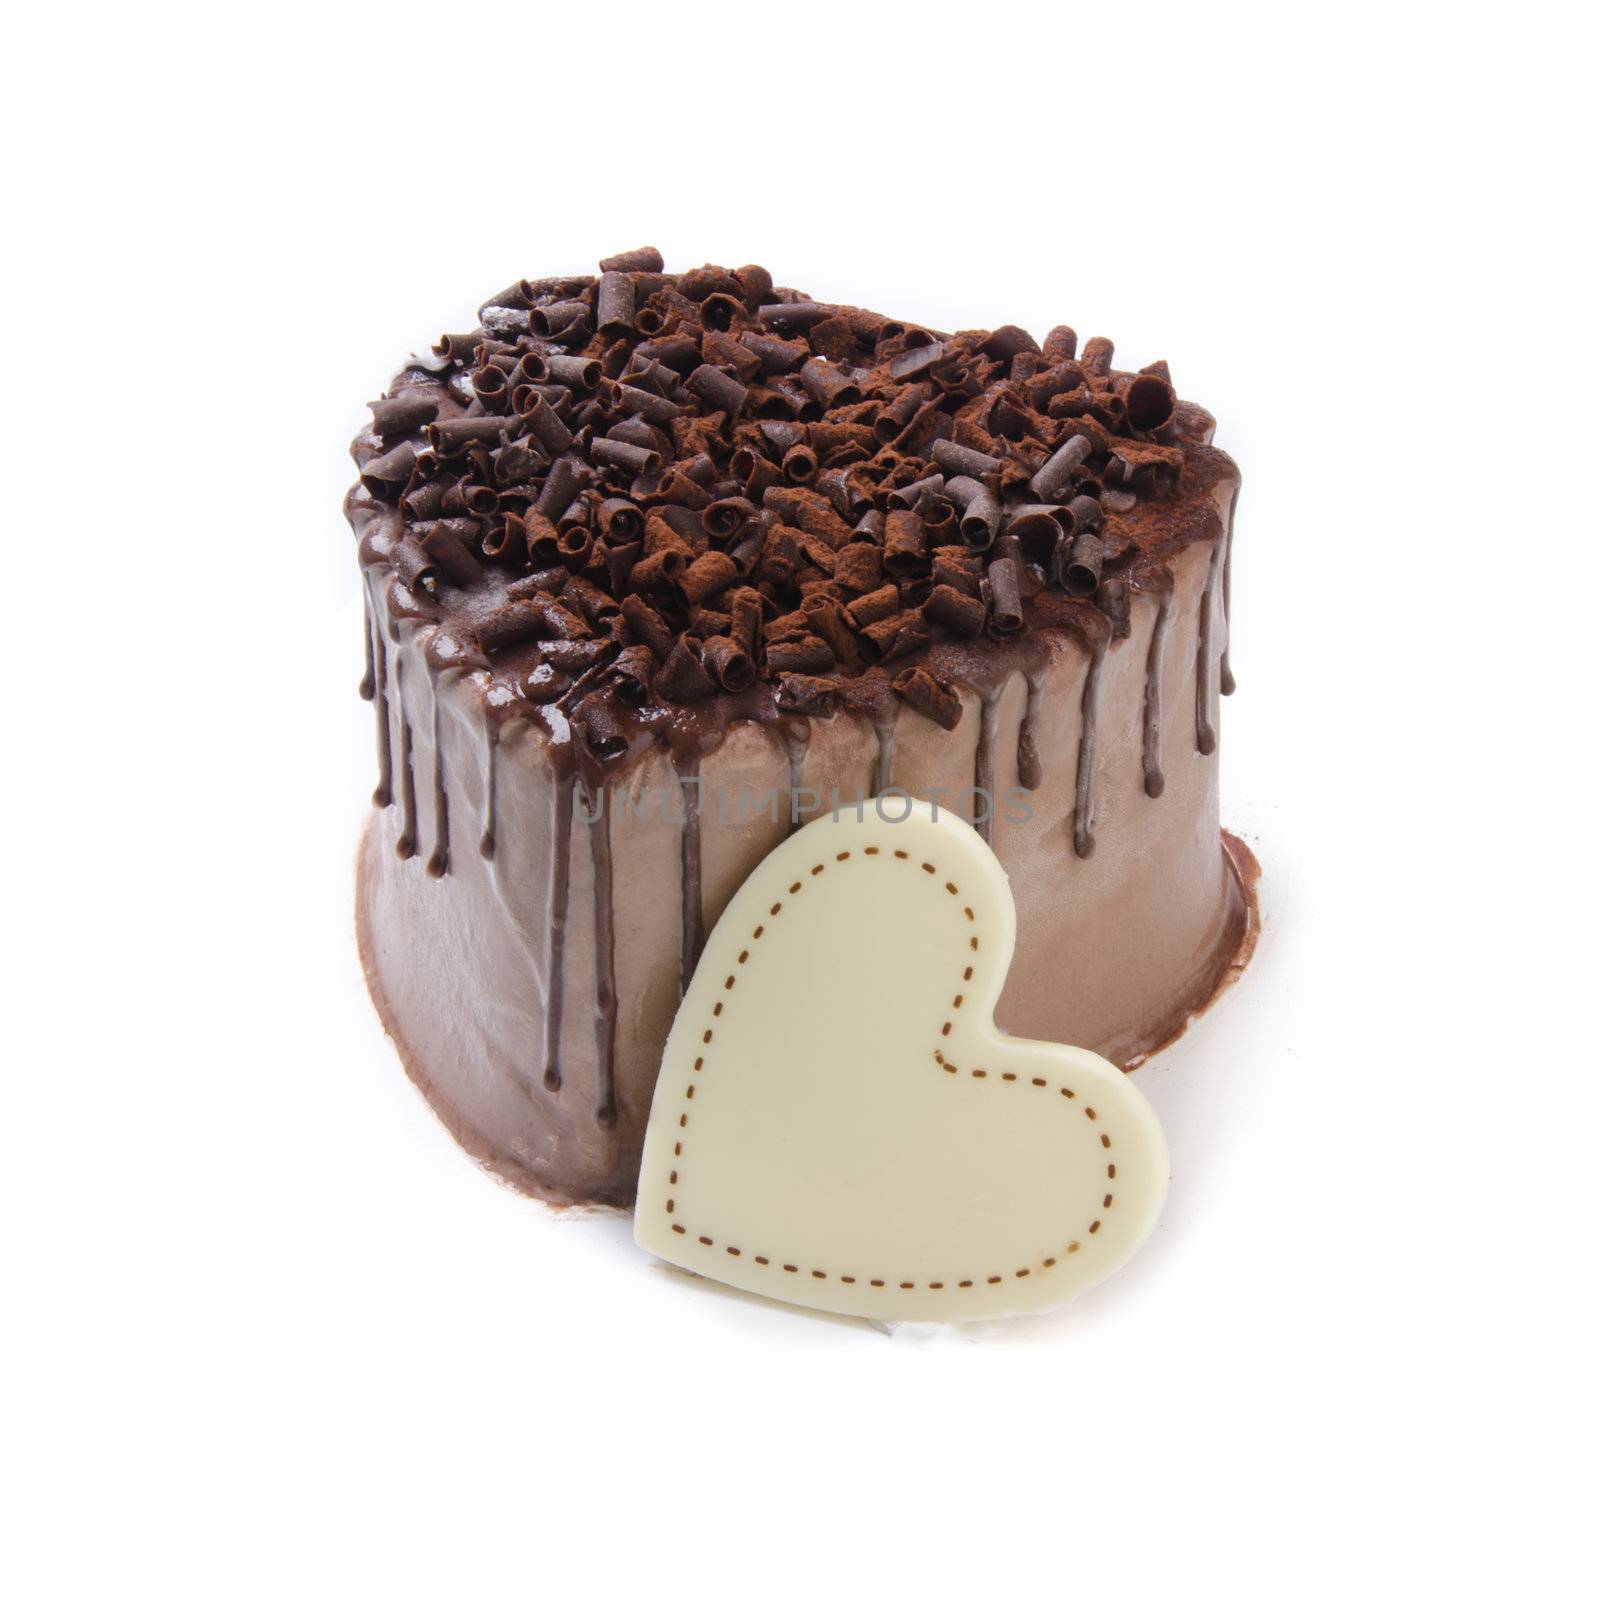 Heart Shaped Cake on white background by heinteh